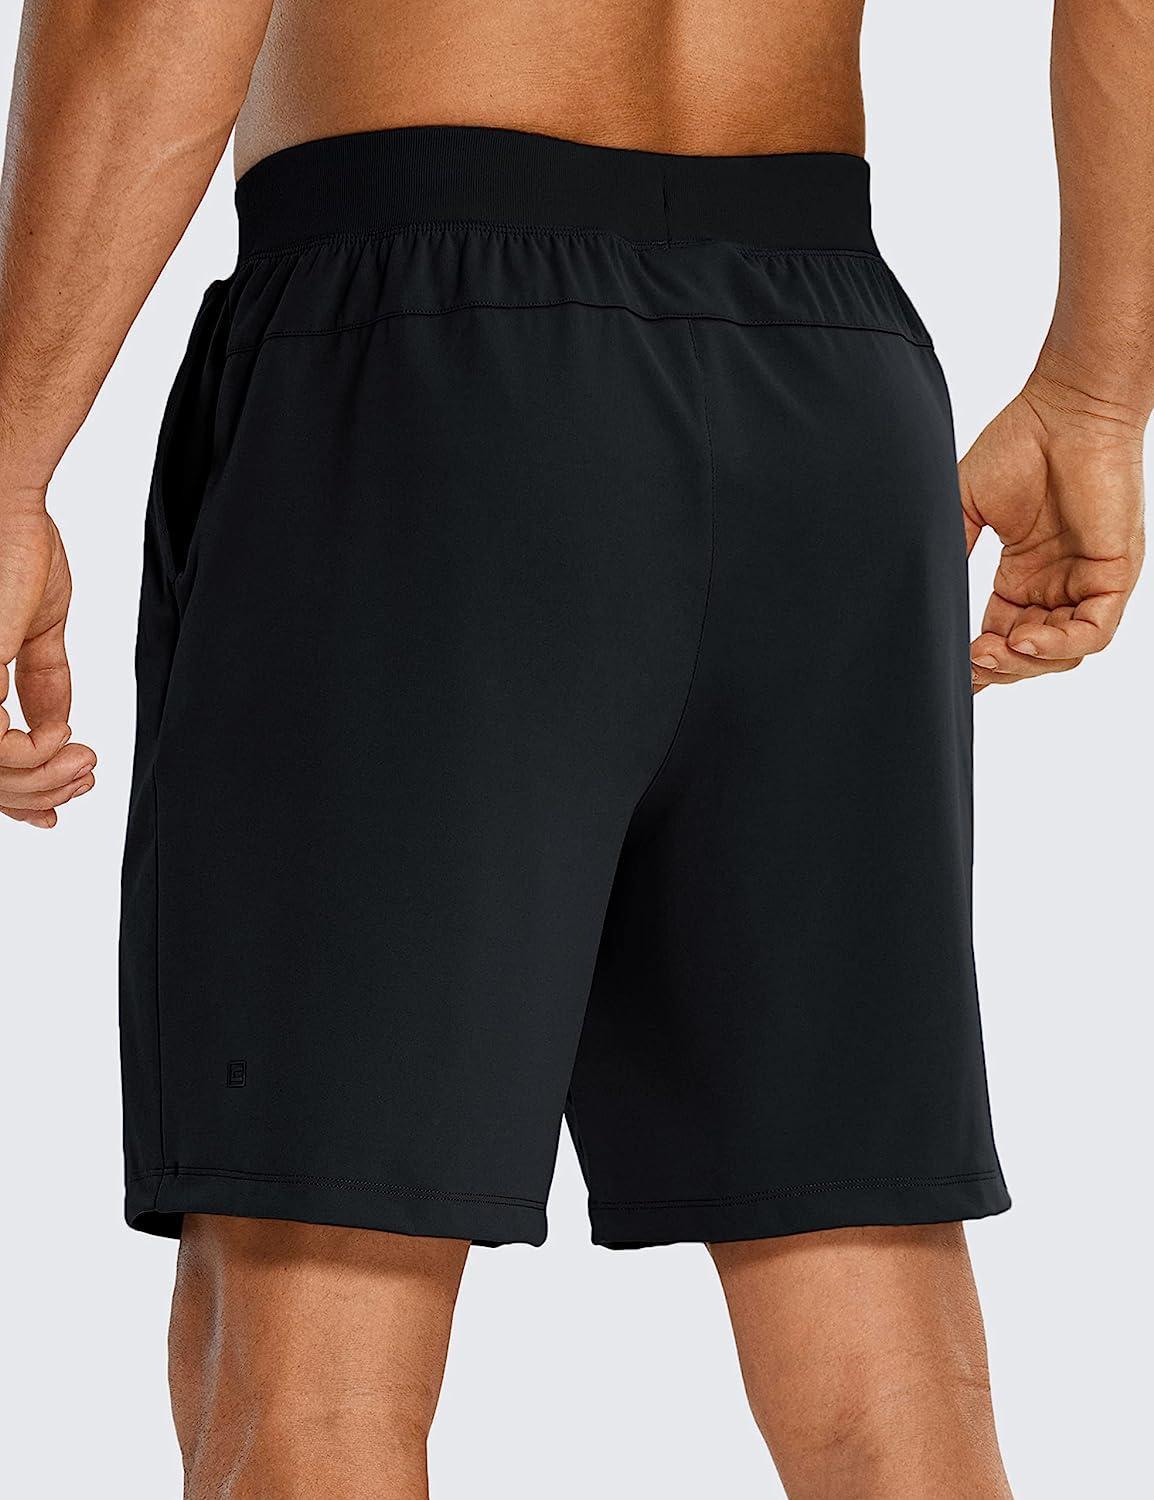 CRZ YOGA Men's Four-Way Stretch Workout Shorts - 7 Soft Durable Gym  Athletic Running Hiking Shorts with Zip Pockets 7 inches Medium Black